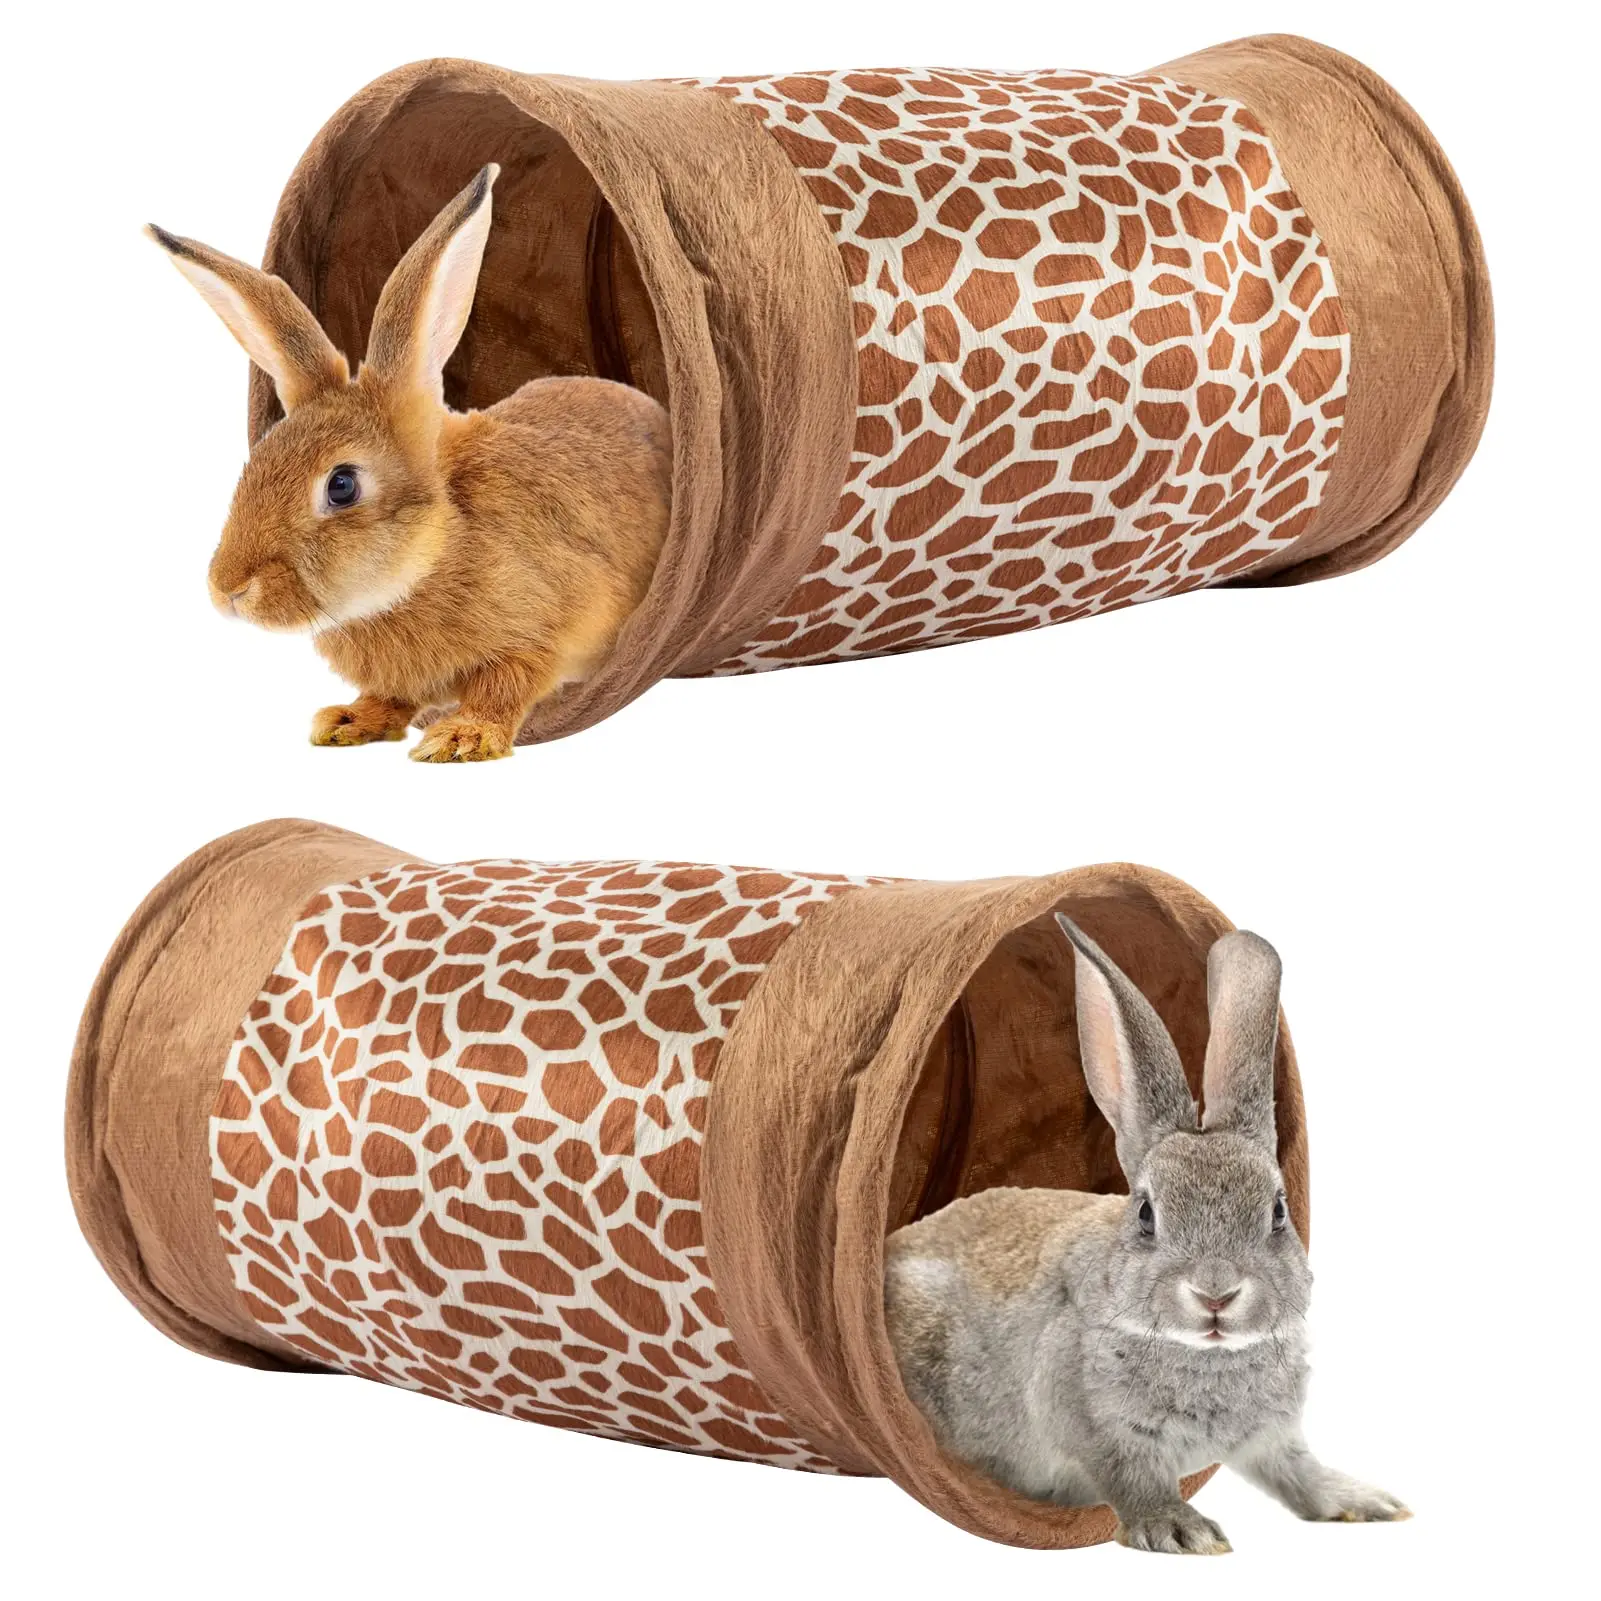 Deer Pattern Collapsible Guinea Pig Tunnel Rabbit Hideout Tunnel Bunny Tunnel with Attractive Sound Paper for Indoor Bunny Guinea Pig Kitten Small Pets in Winter 2Pcs 9.8 x 19.7 Rabbit Tunnel 